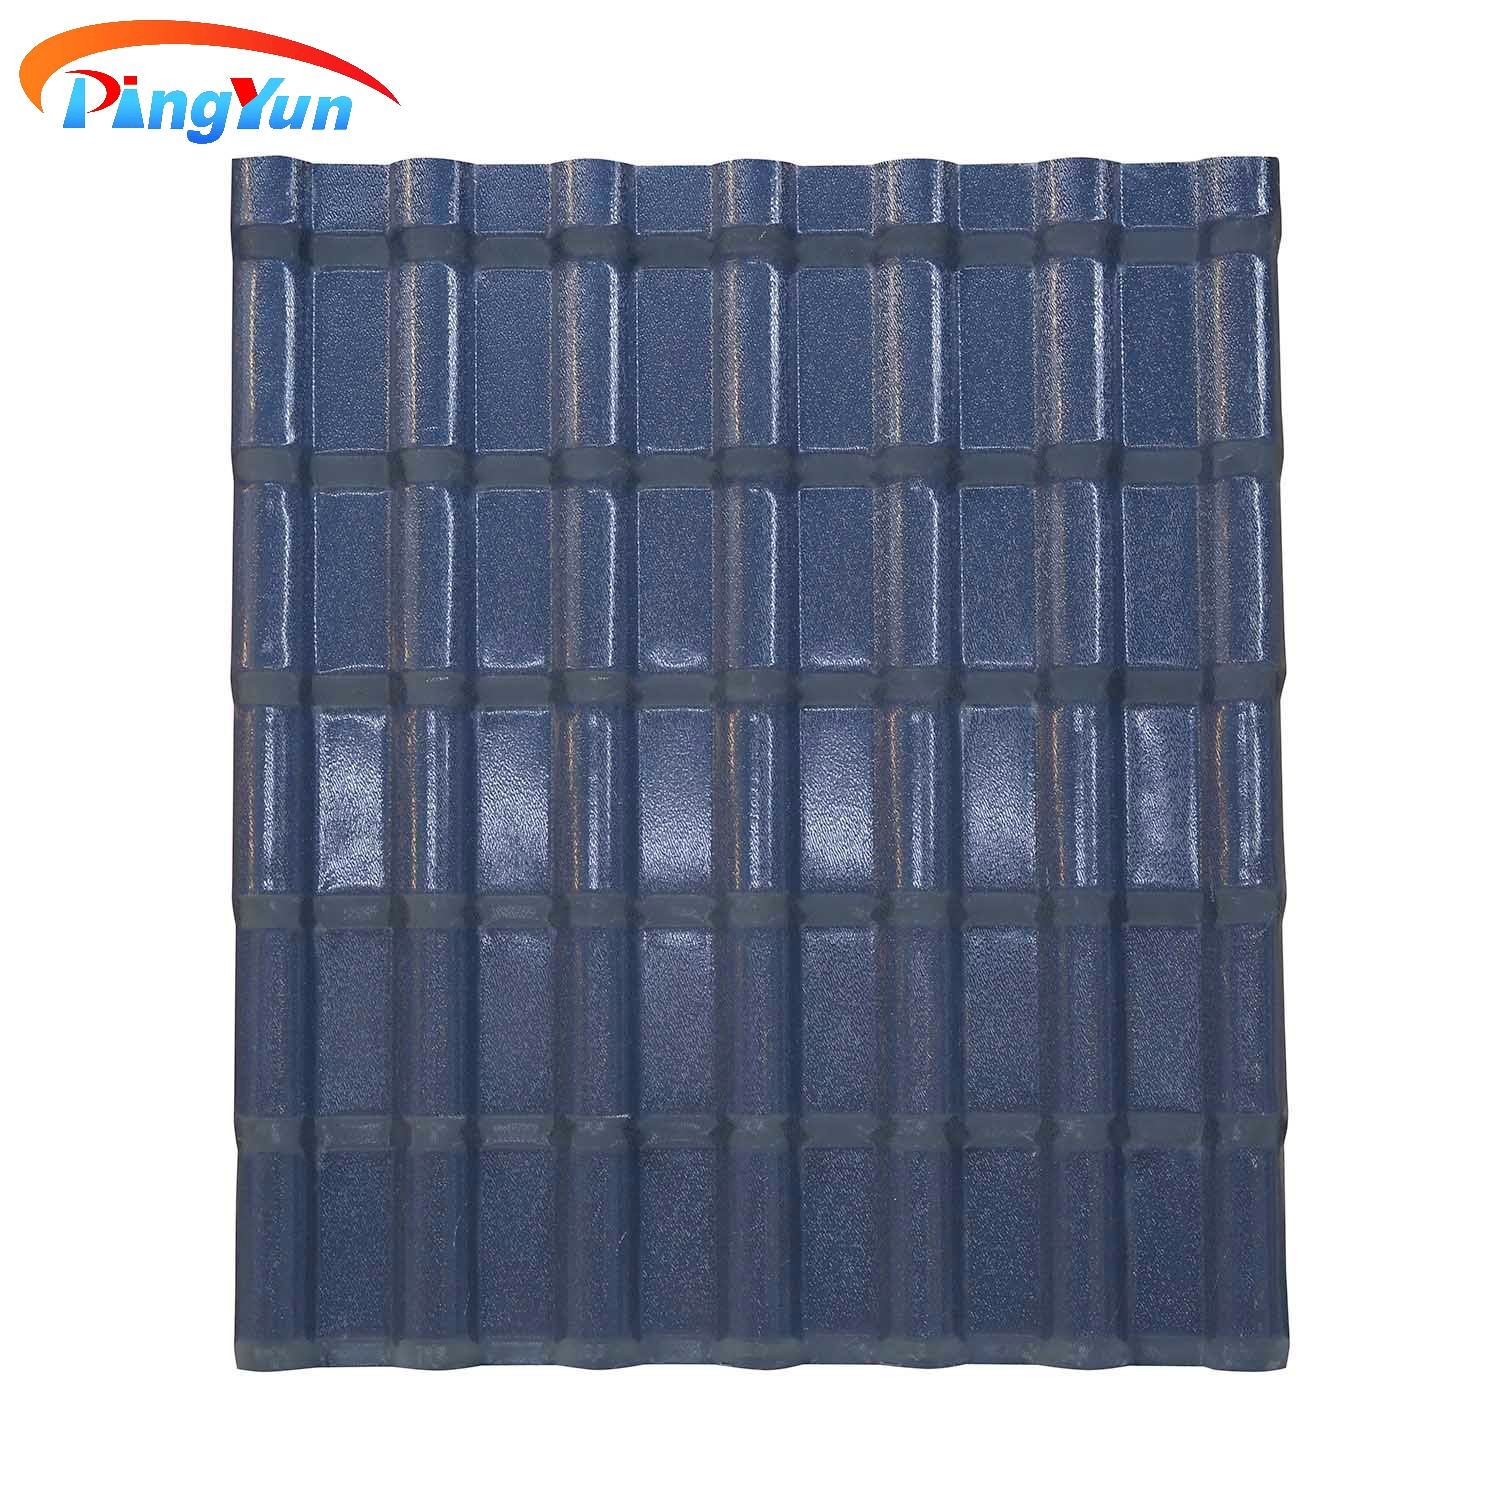 Colombia teja colonial pvc Spanish synthetic resin pvc roof tile asa pvc plastic roof sheet for residential house